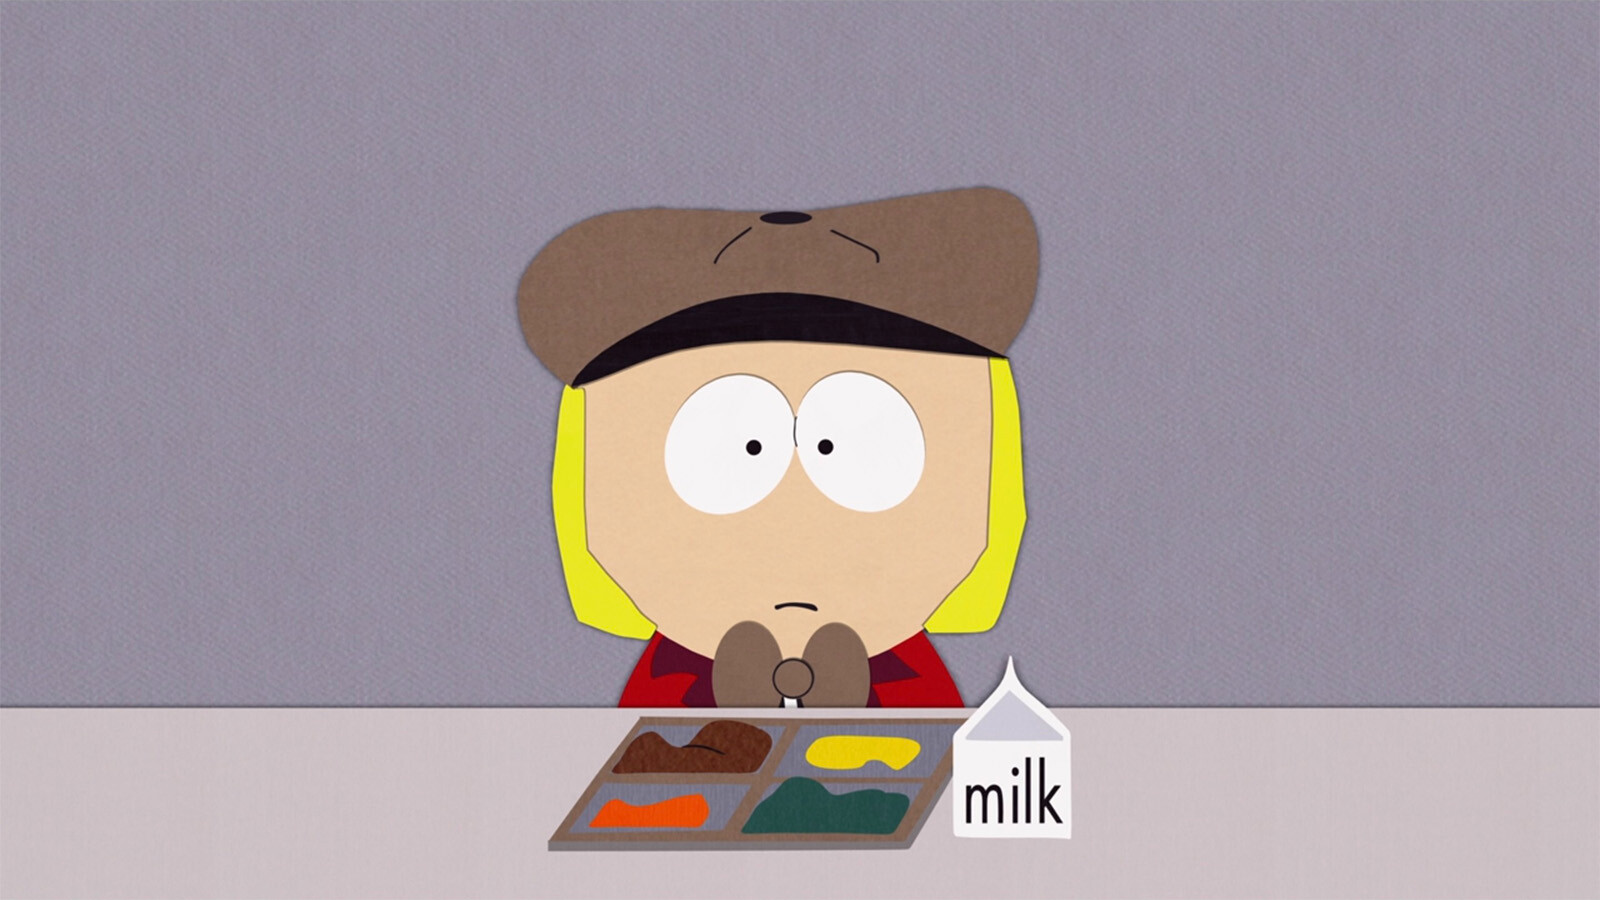 50 South Park Characters Ranked by How Likely They'd Help You Hide A Body